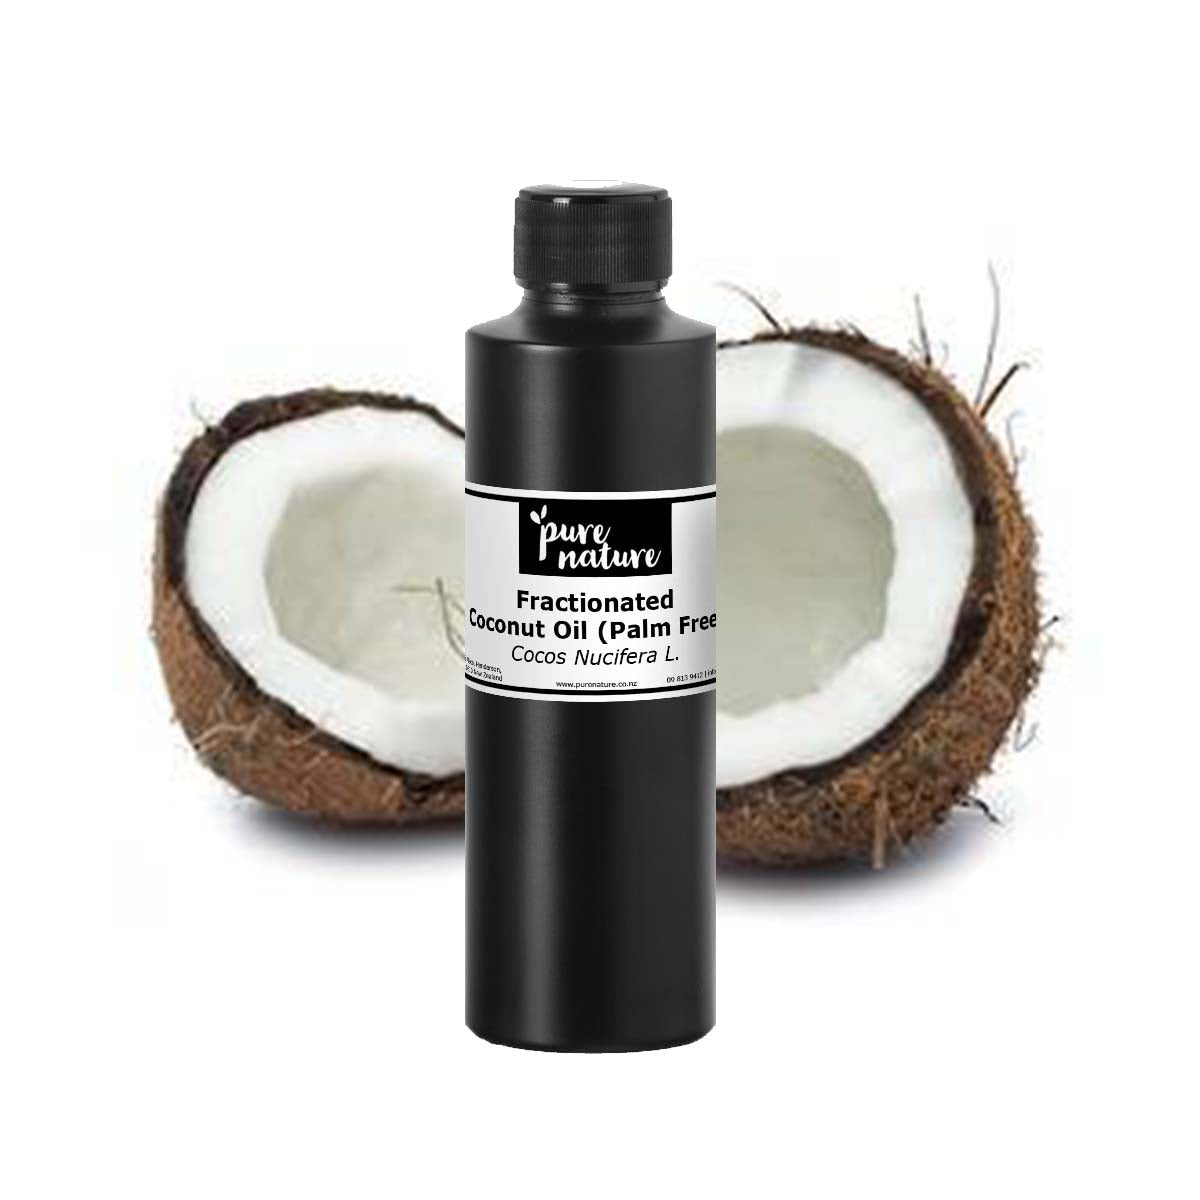 Fractionated Coconut Oil (Palm Free)